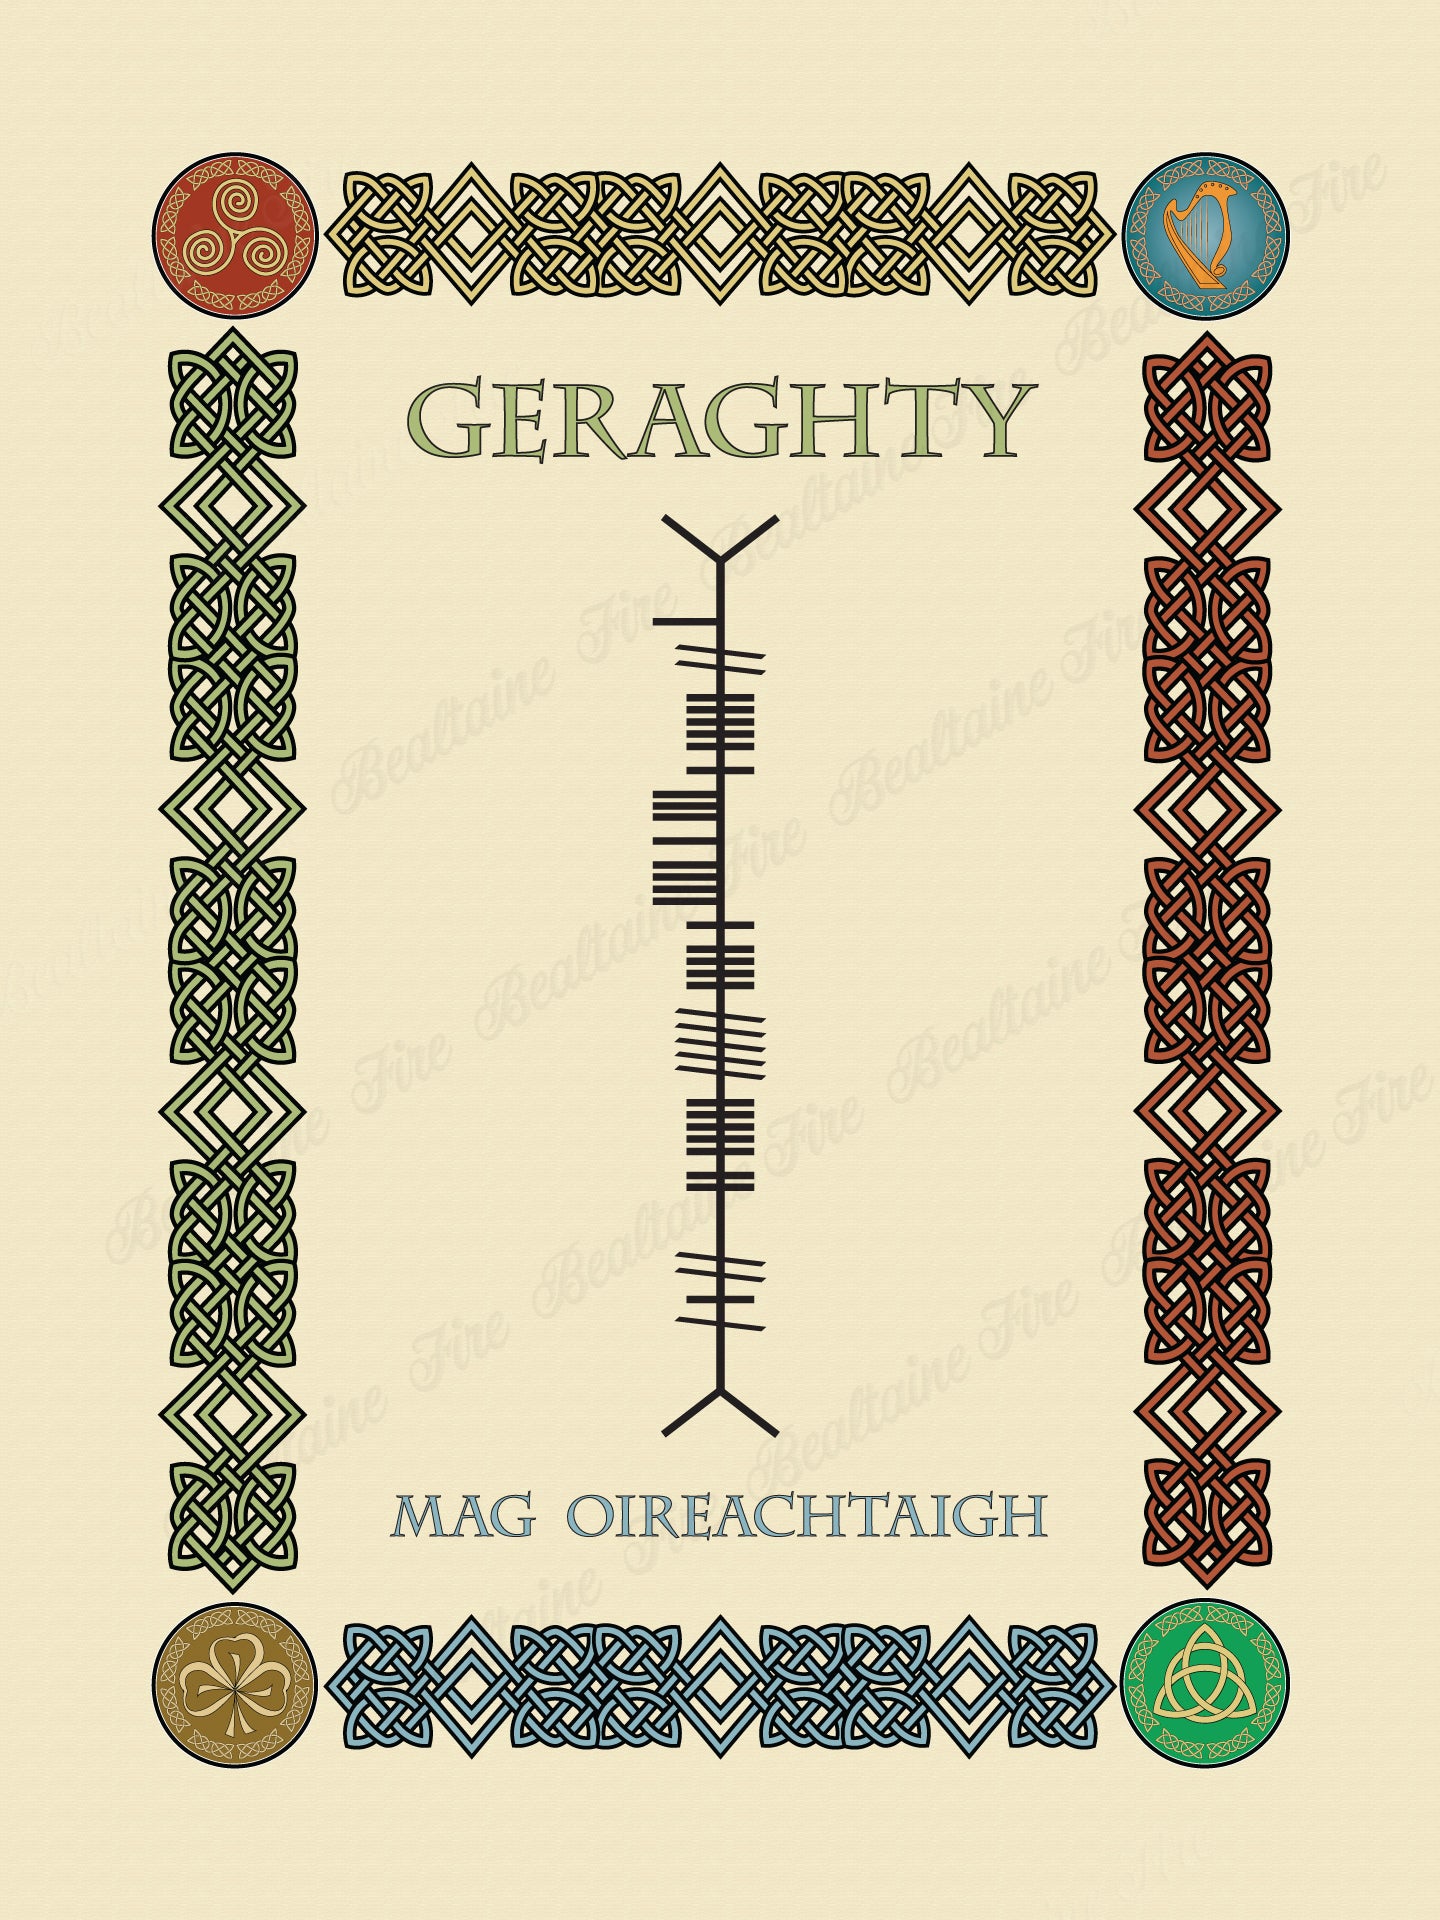 Geraghty in Old Irish and Ogham - Premium luster unframed print